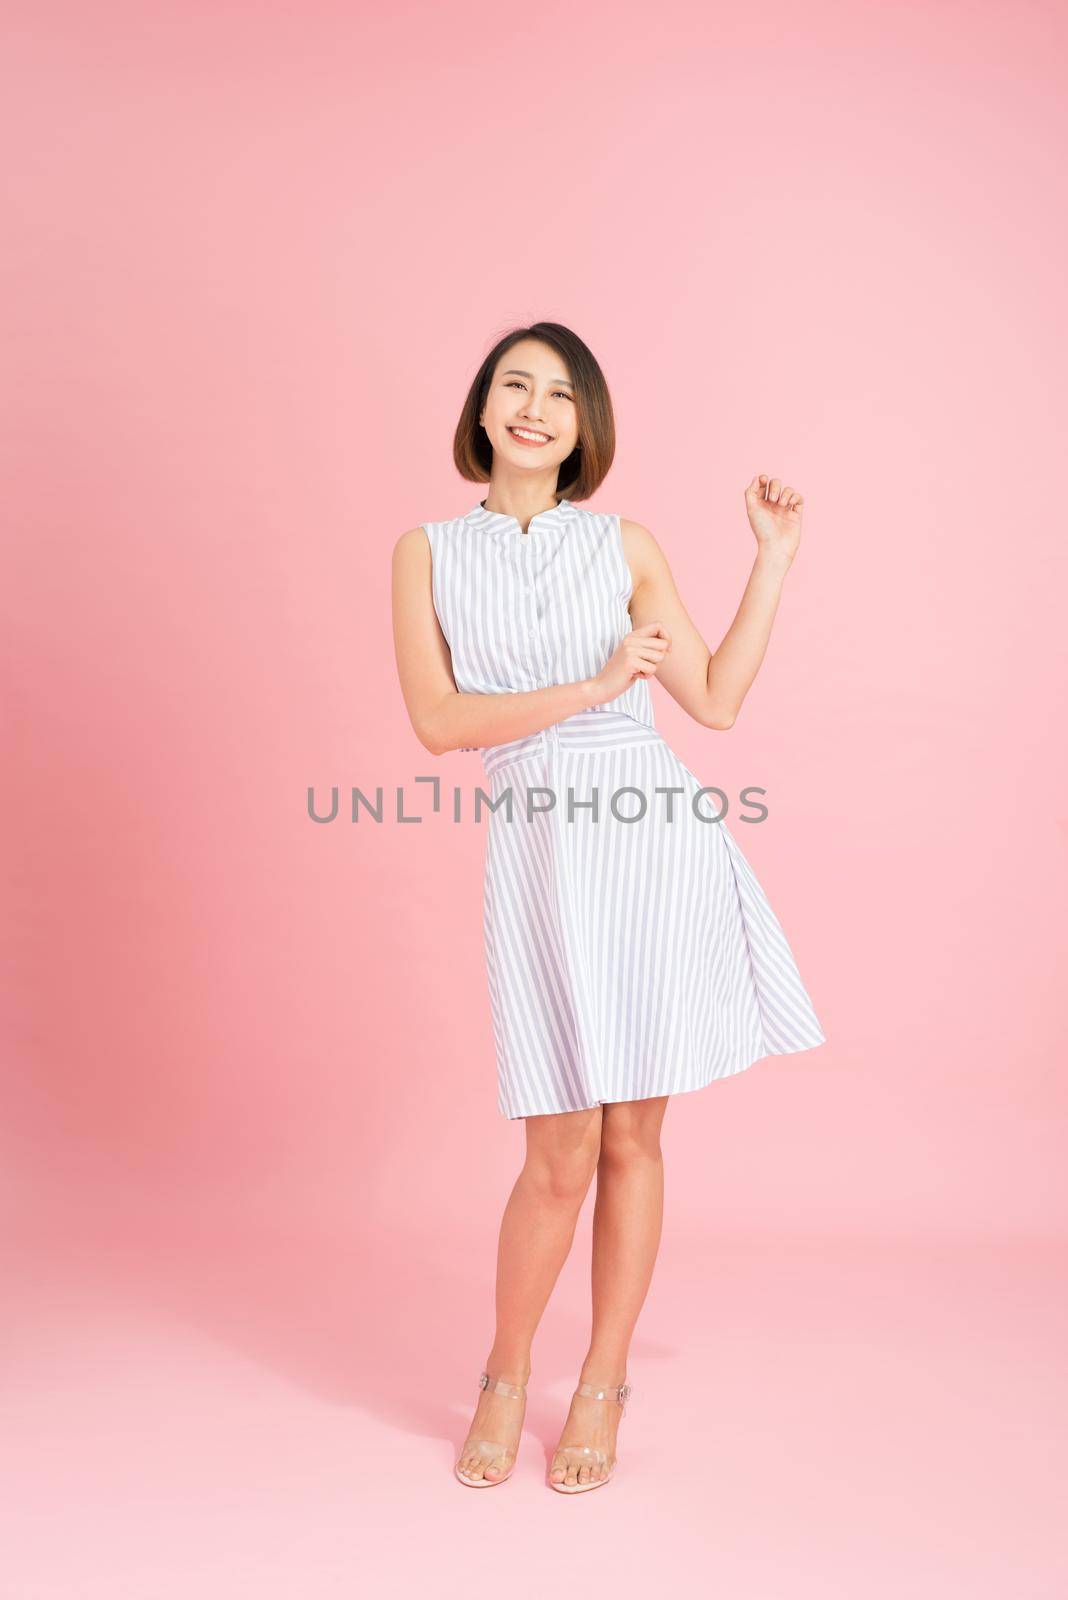 Young asian girl dancing with inspired face expression. Active young woman in casual summer outfit having fun indoor.